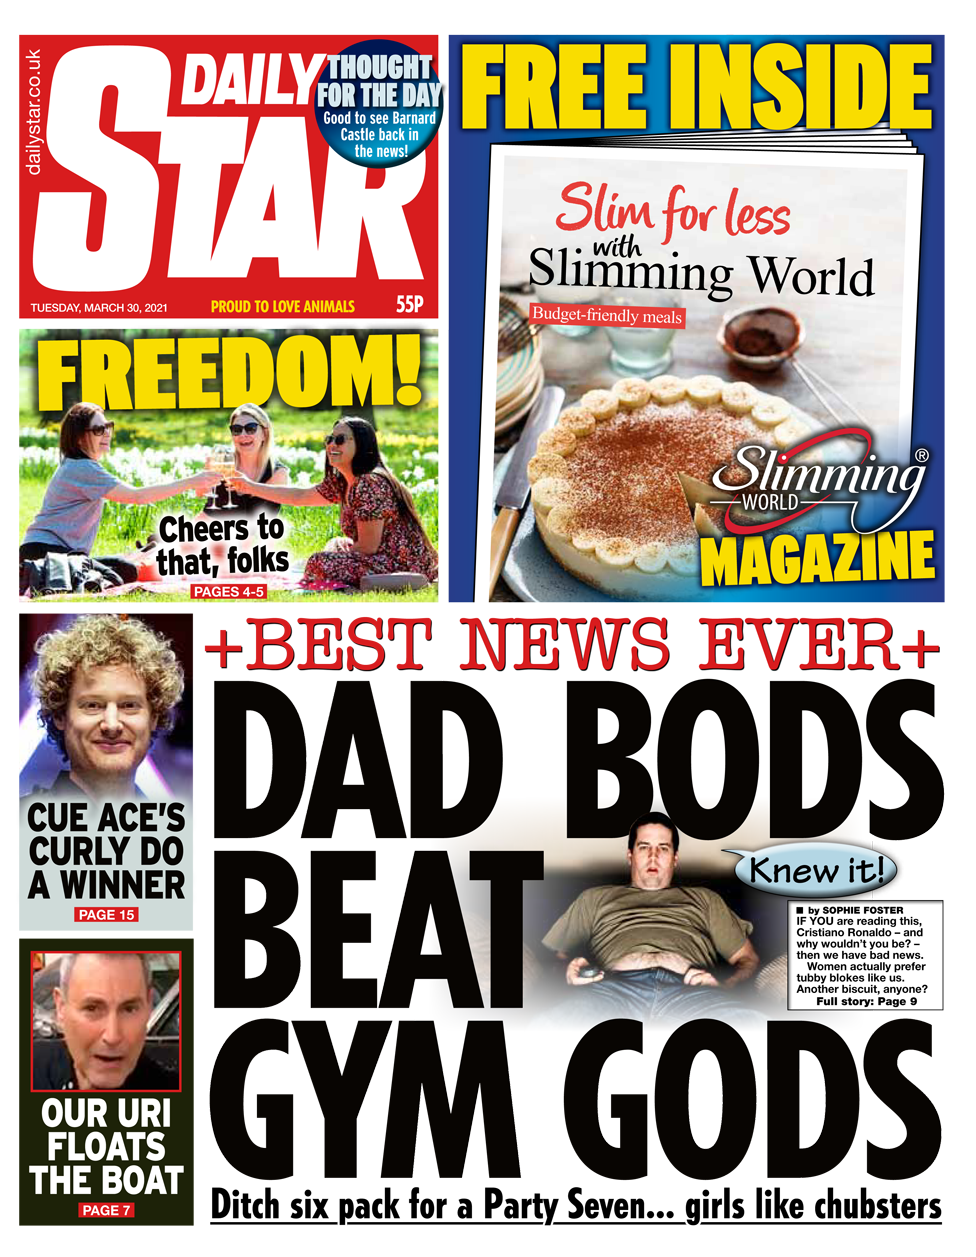 Daily Star front page